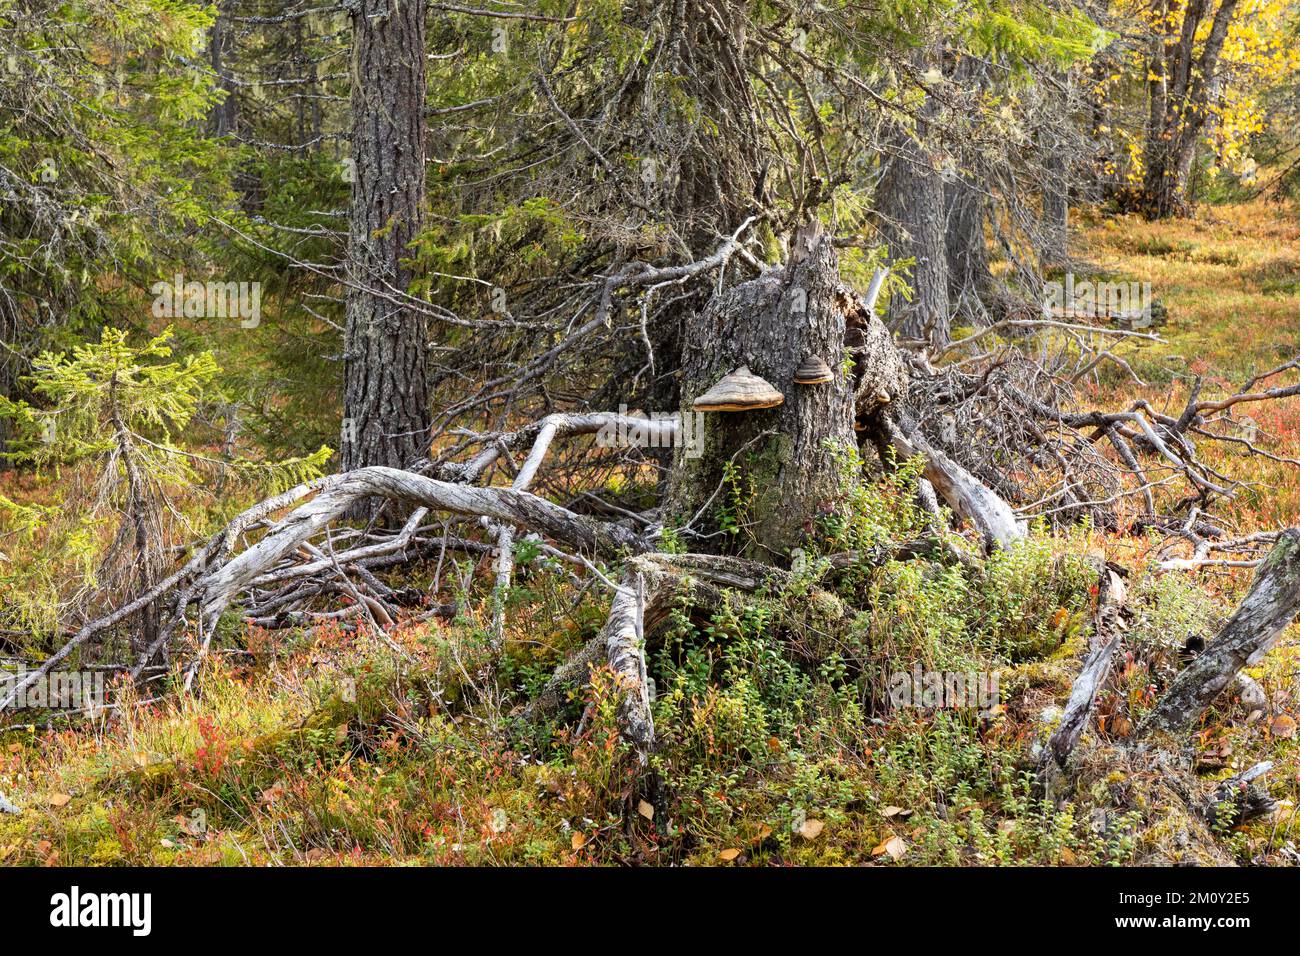 Deadwood in an old-growth forest in autumnal Salla National Park, Northern Finland Stock Photo